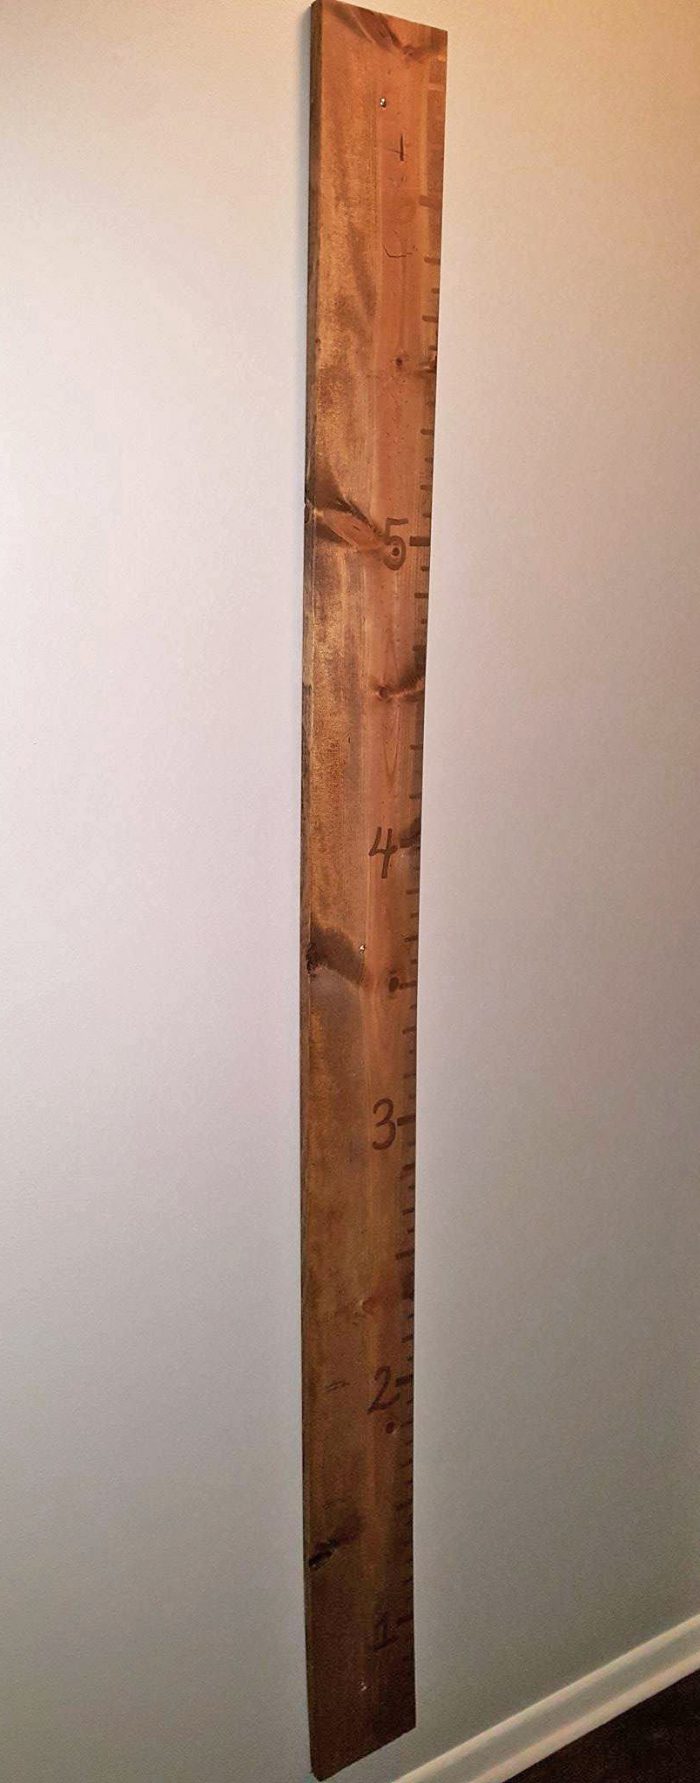 Easy DIY Growth Chart Wood Ruler for Kids